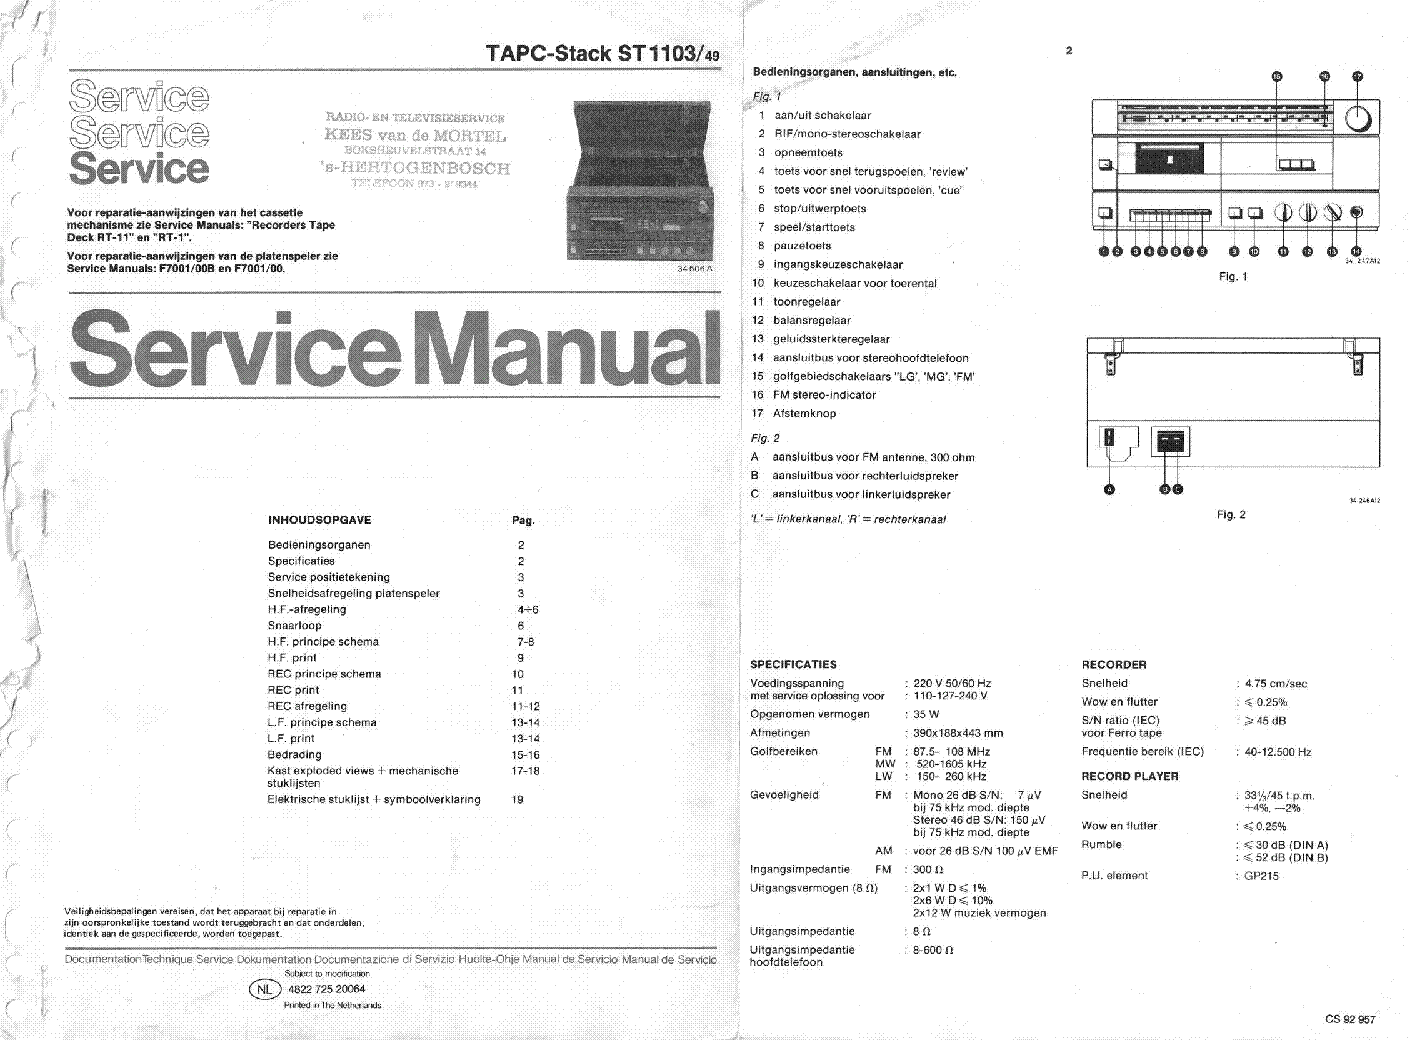 PHILIPS ST1103-49 SM ERRES service manual (1st page)